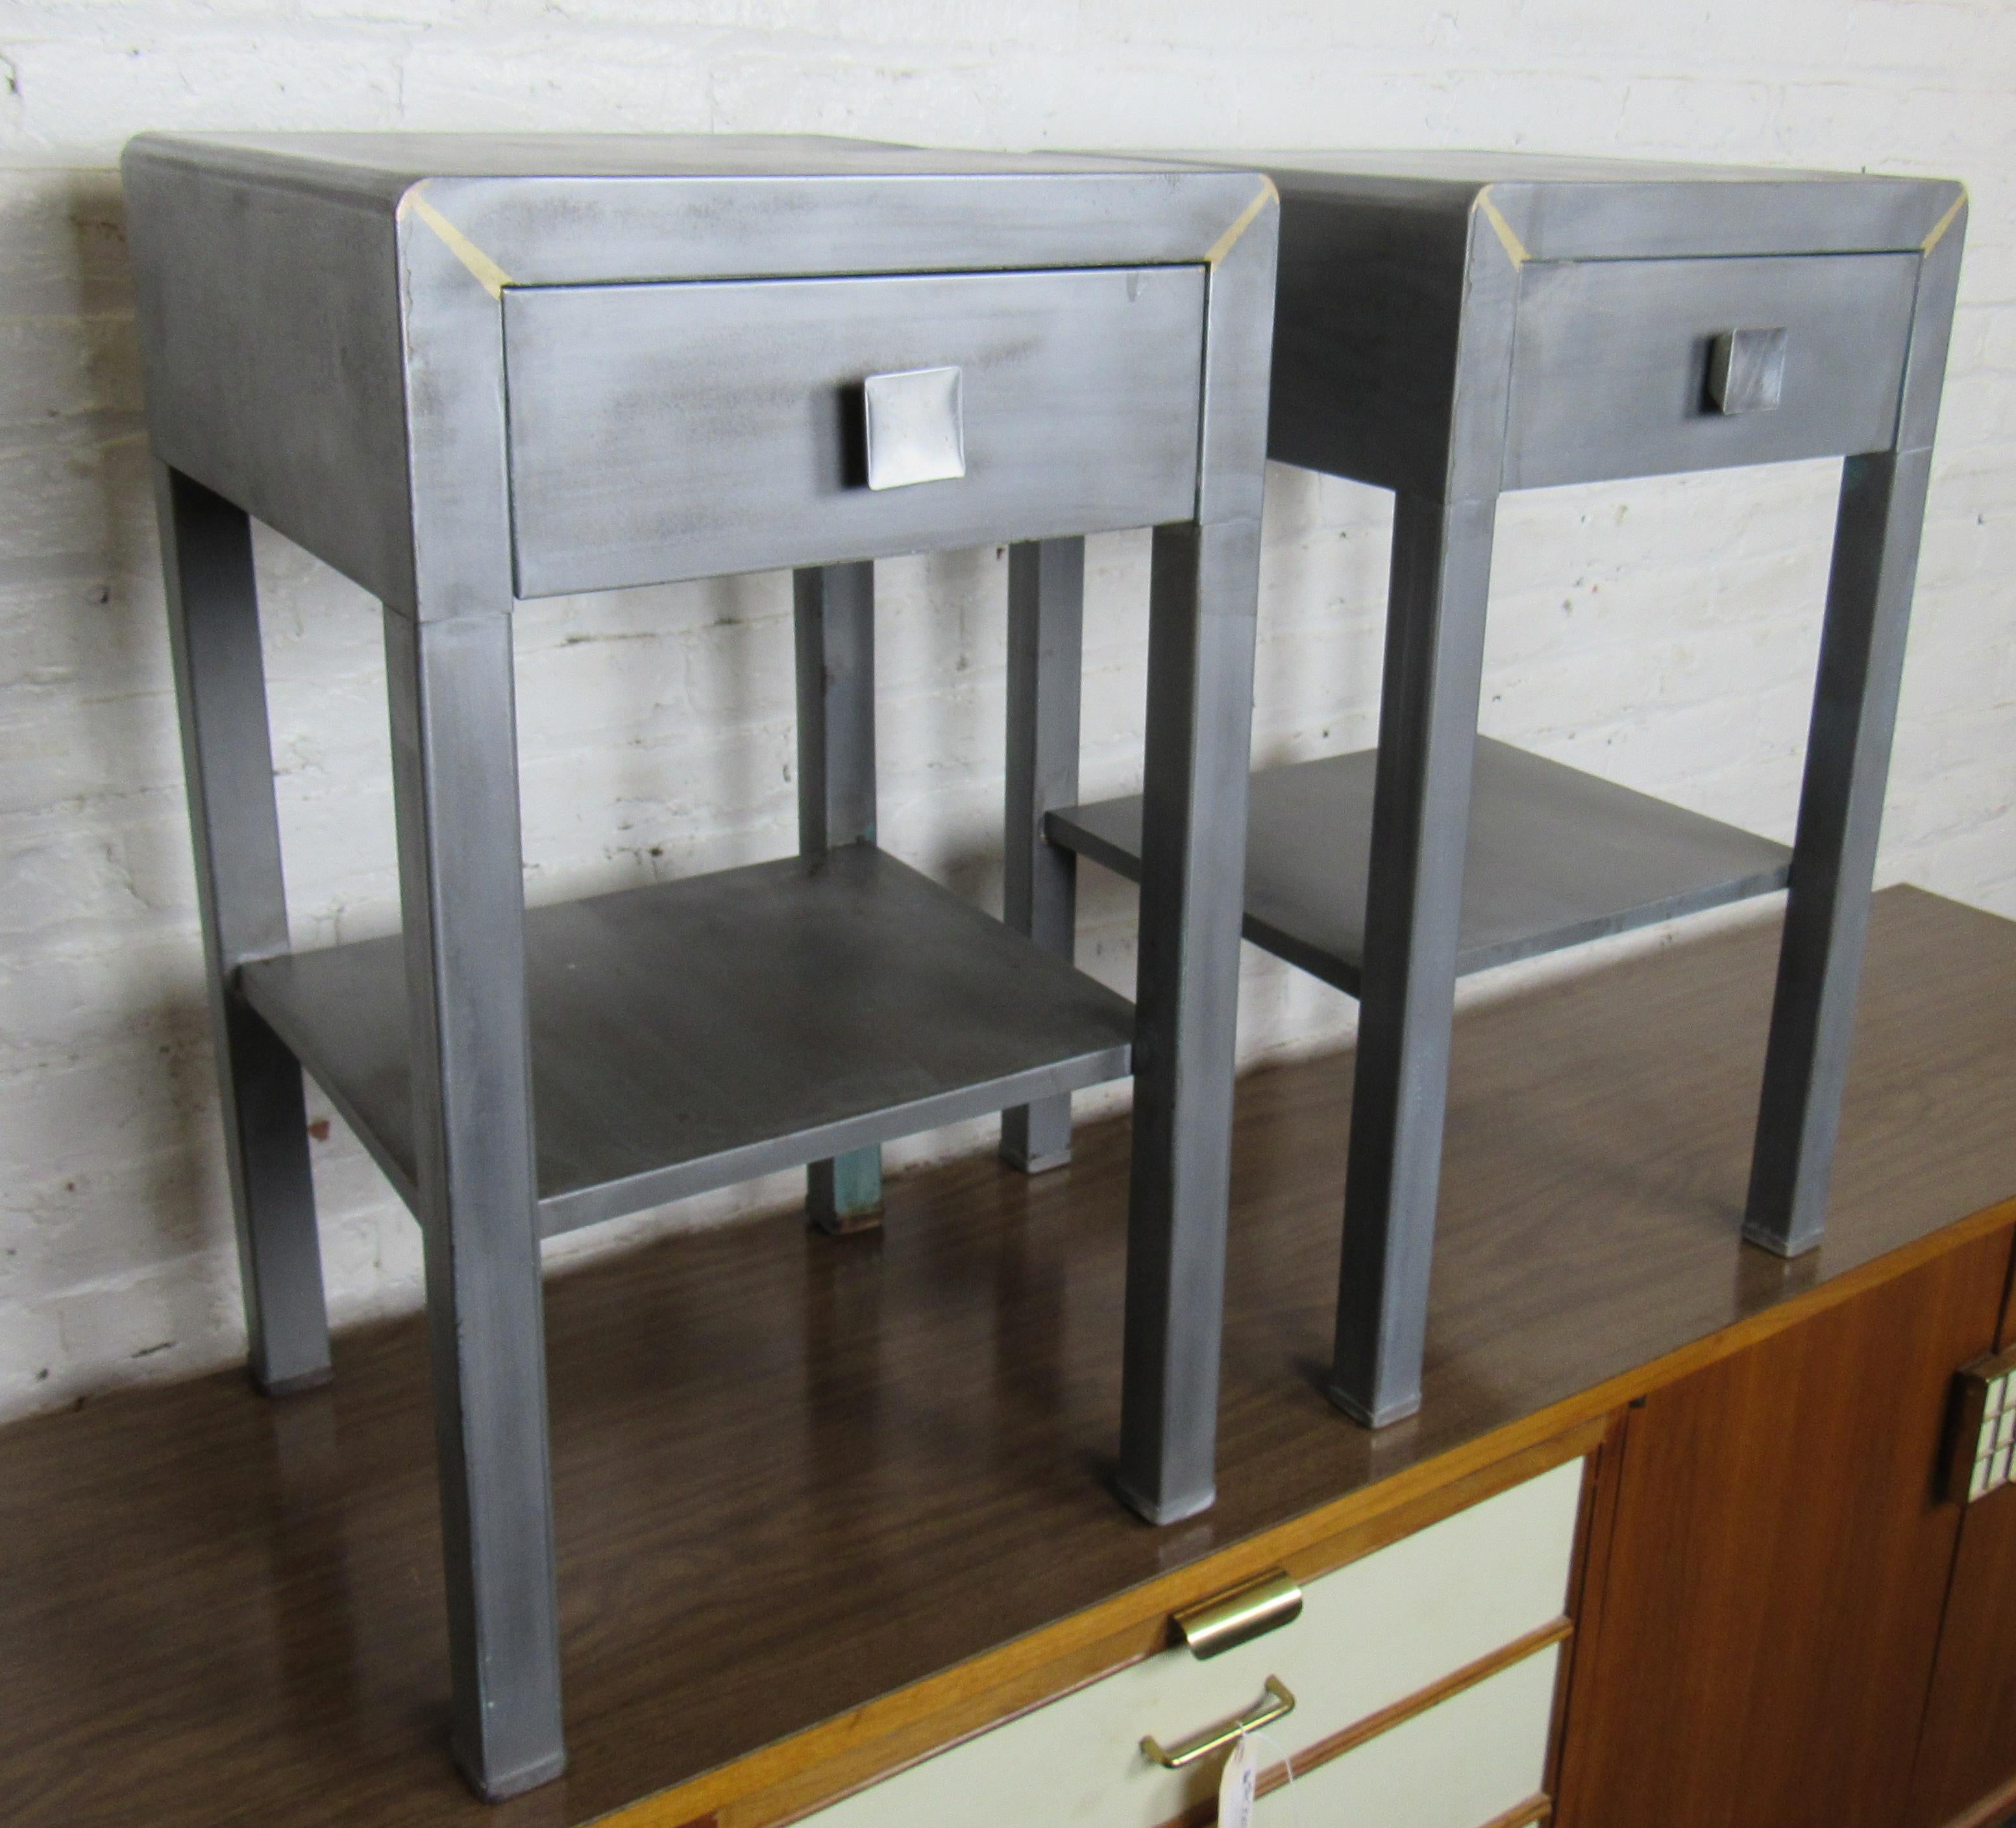 Pair of refinished industrial night stands or side tables. From the mid-century era. Restored in a bare metal style finish. good for bedroom or bathroom. 
(Please confirm item location - NY or NJ - with dealer).
   